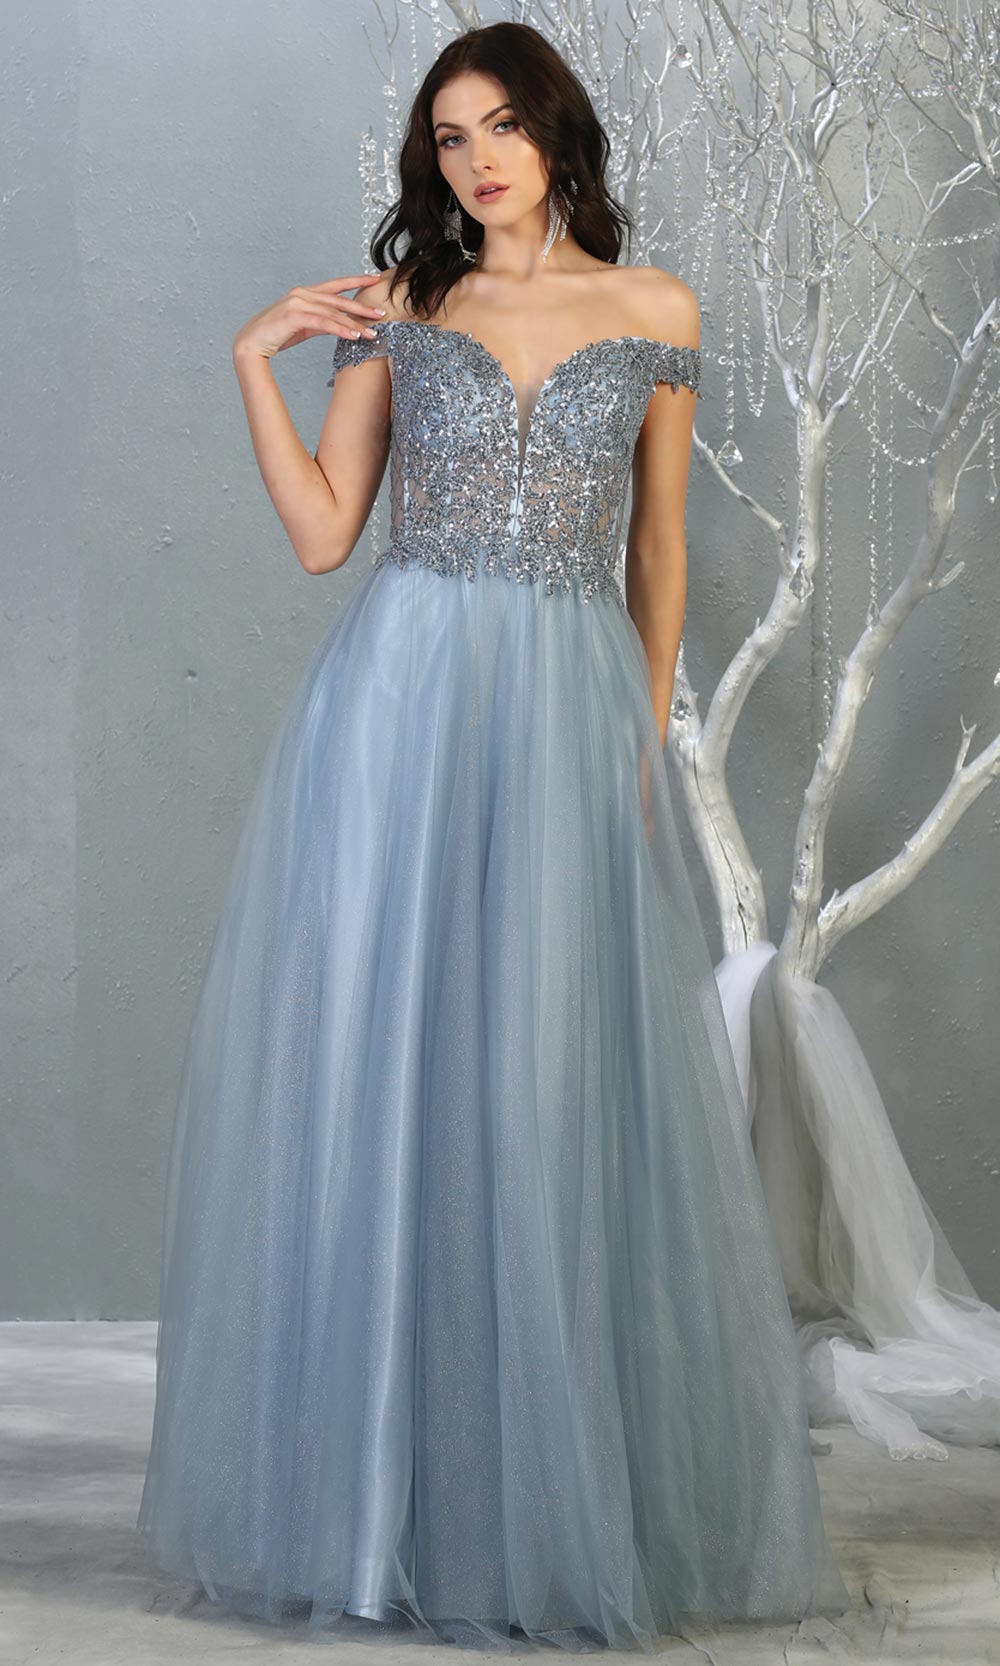 Mayqueen RQ7864 long dusty blue off shoulder sequin top evening gown. Full length flowy dress w/ tulle skirt is perfect for  enagagement/e-shoot dress, sweet 16, debut, formal evening party dress, prom, engagement, wedding reception. Plus sizes avail.jpg